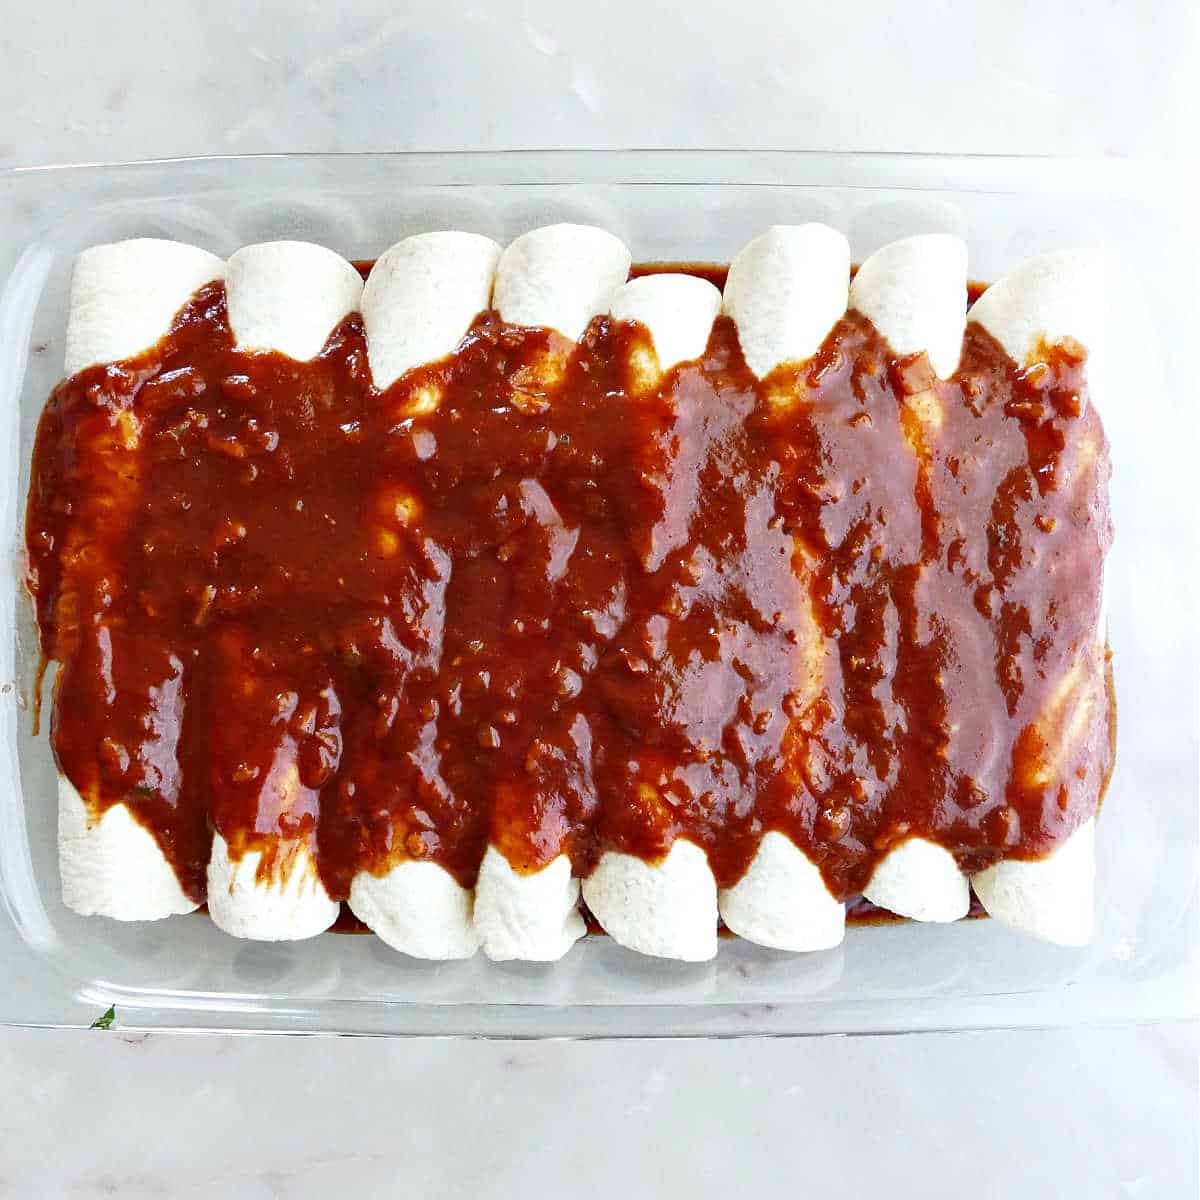 enchiladas rolled up and covered with enchilada sauce in a rectangular baking dish